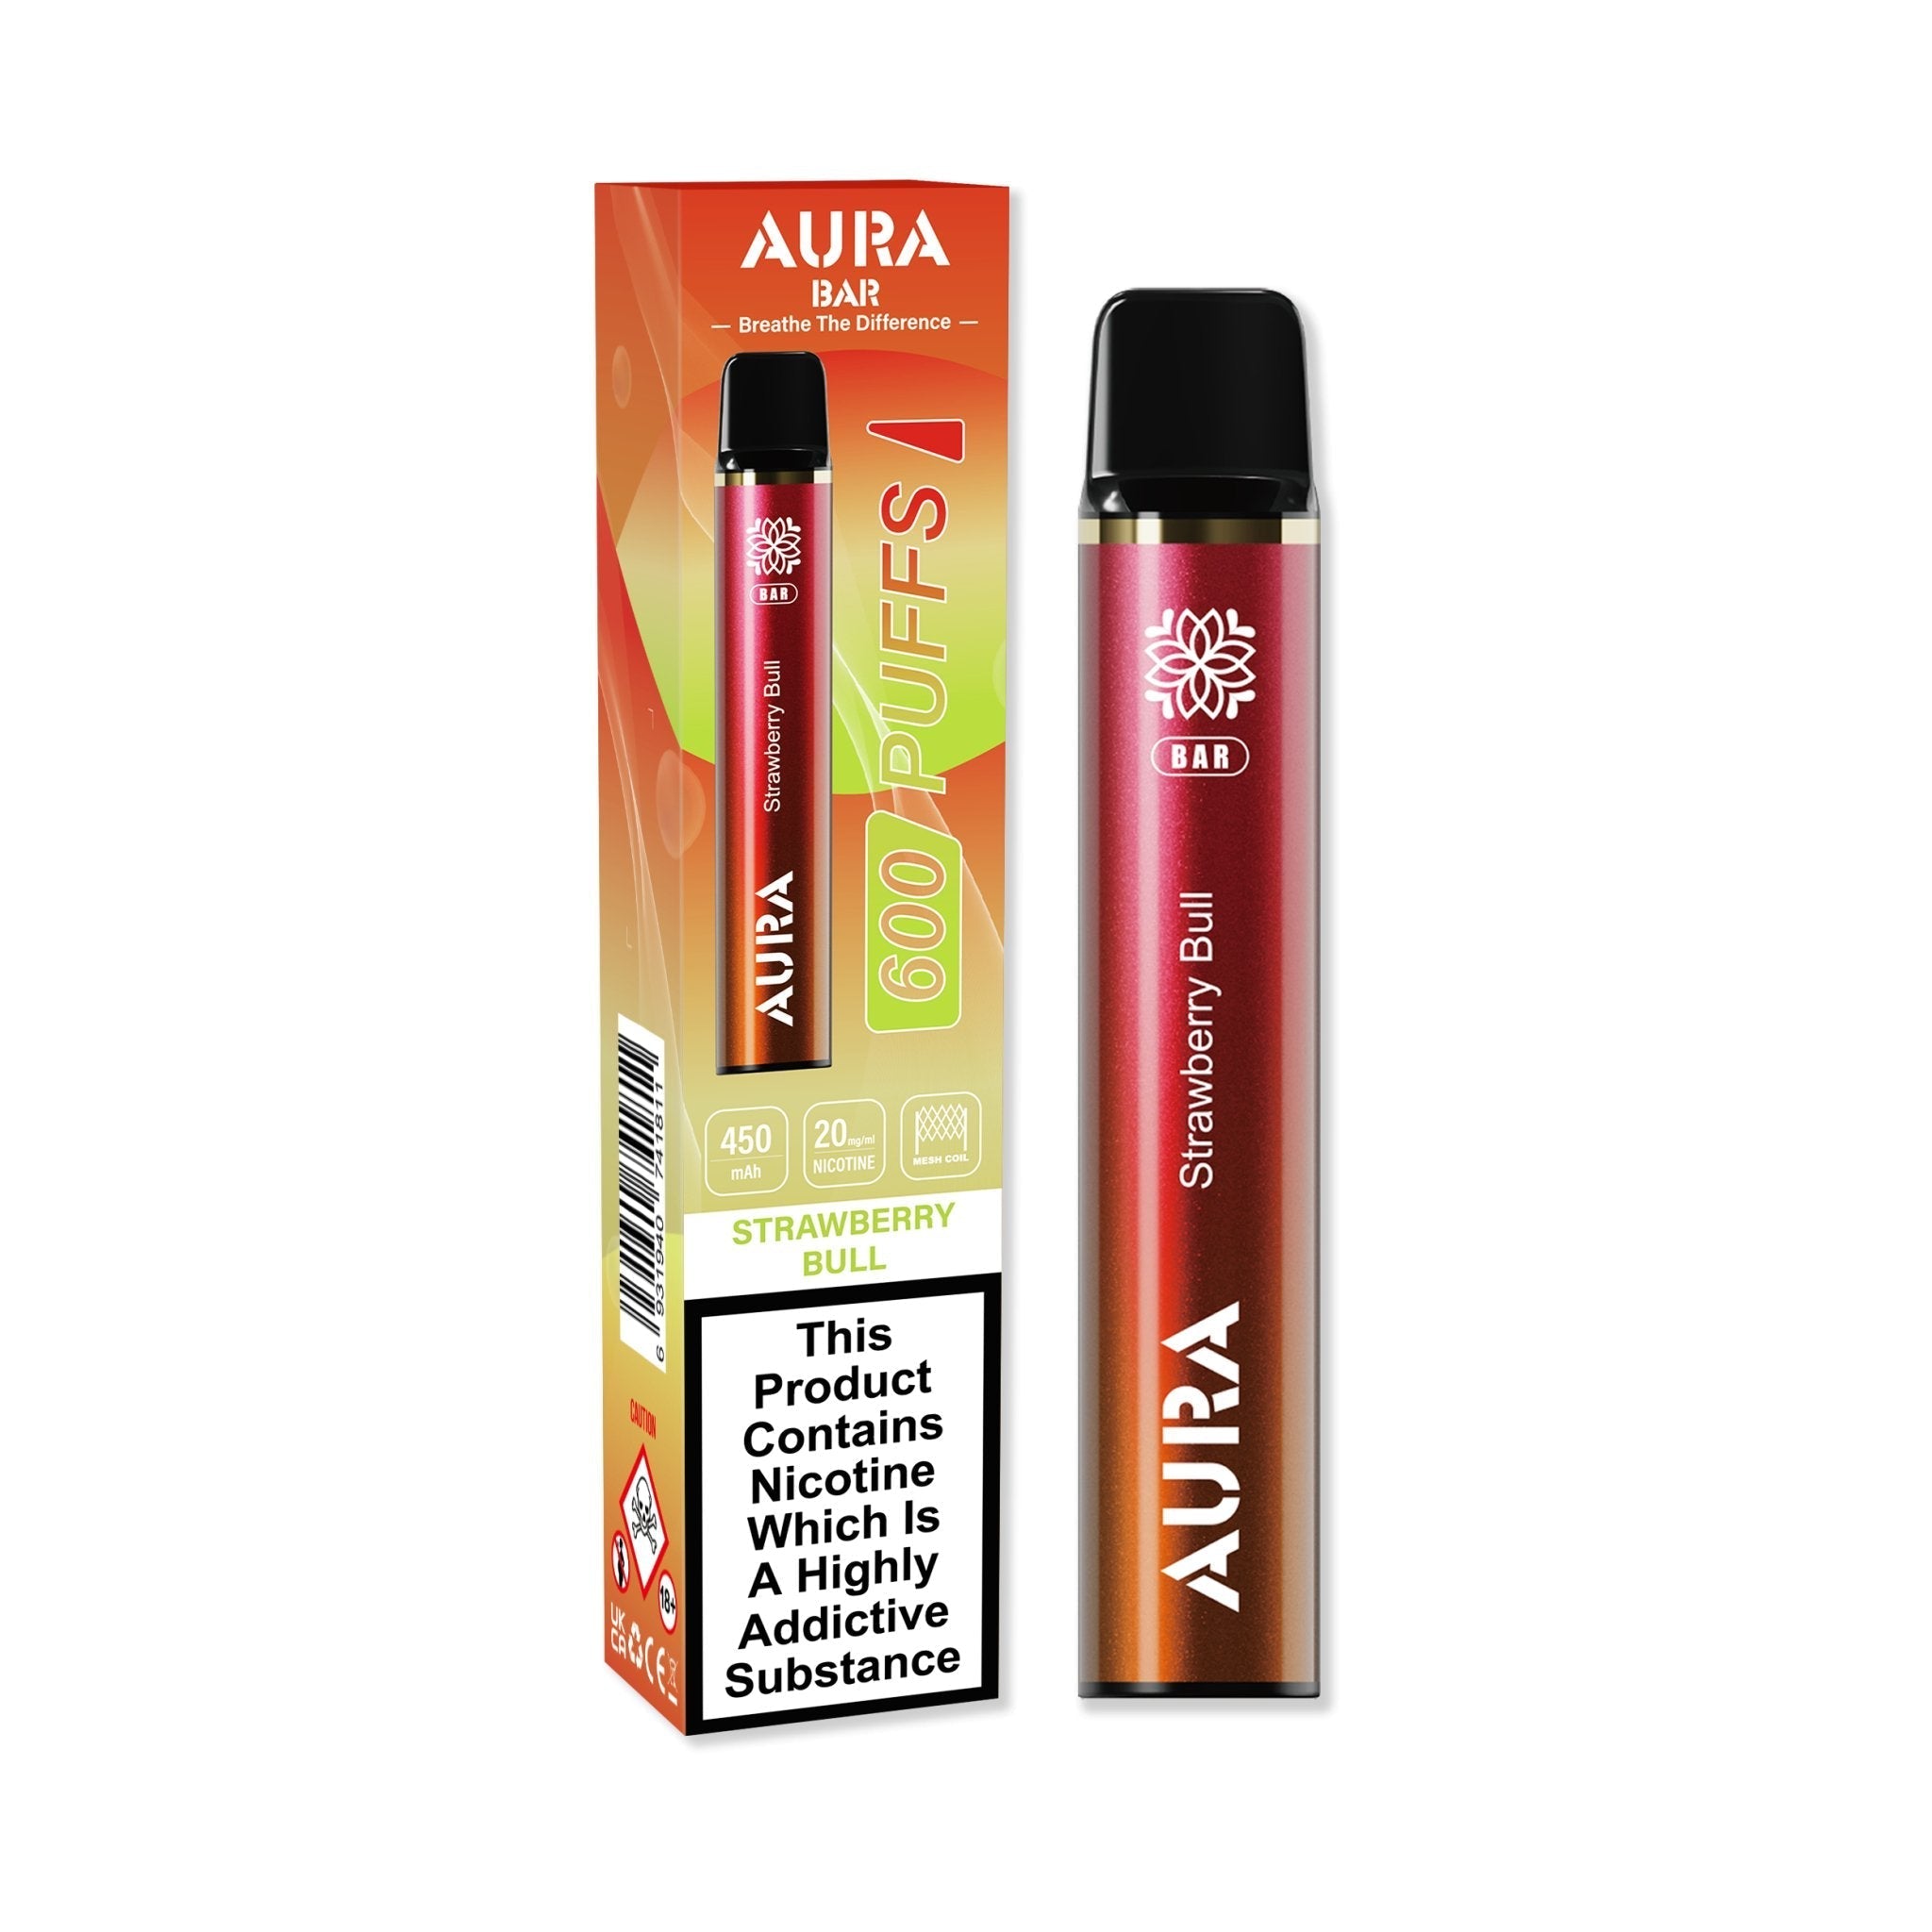 Aura Bar 600 Puffs Disposable Vape By Crystal Prime - Wolfvapes.co.uk-Strawberry Bull